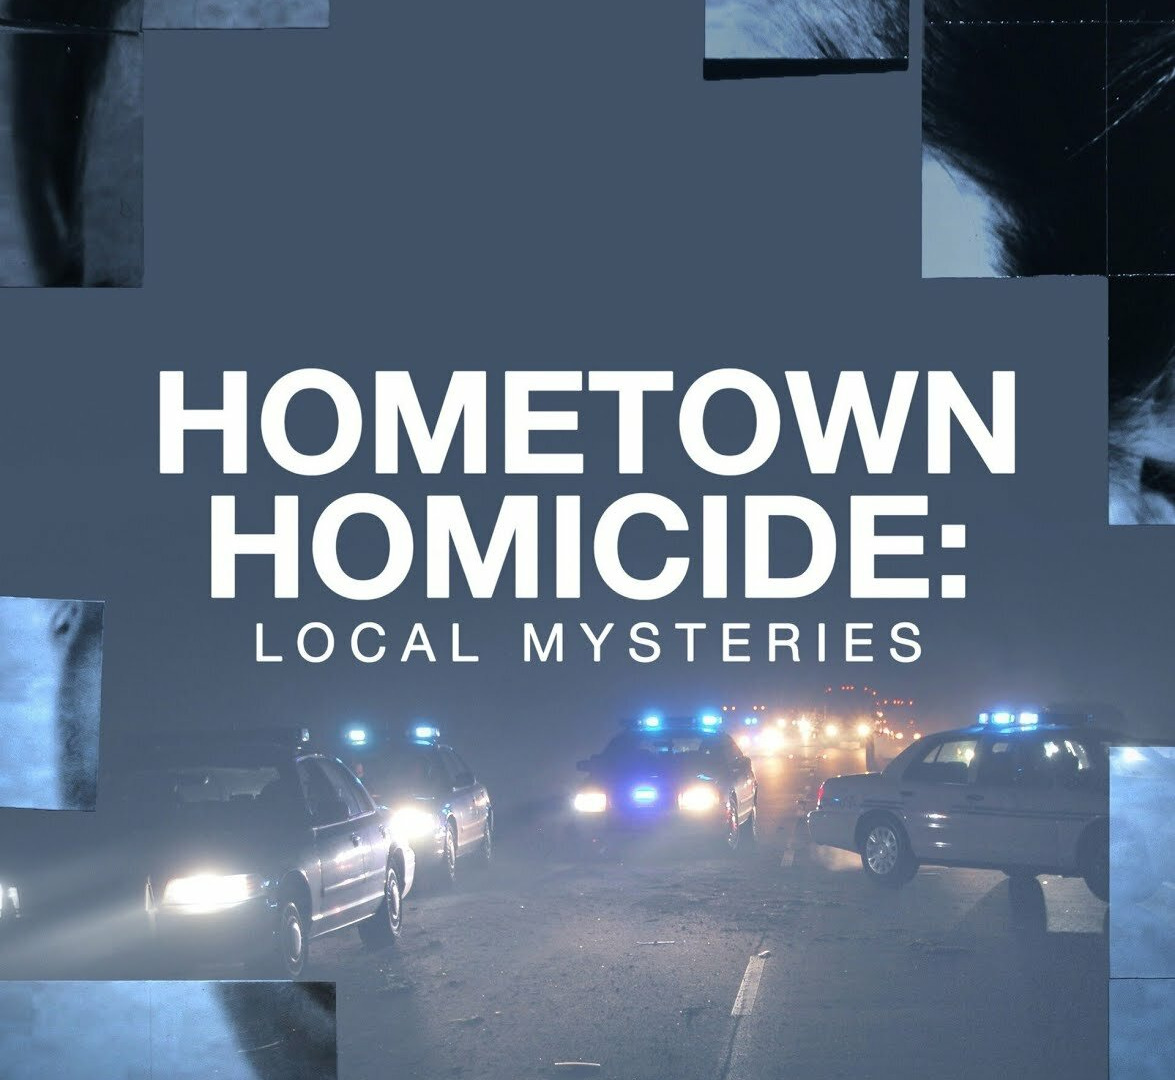 Show Hometown Homicide: Local Mysteries